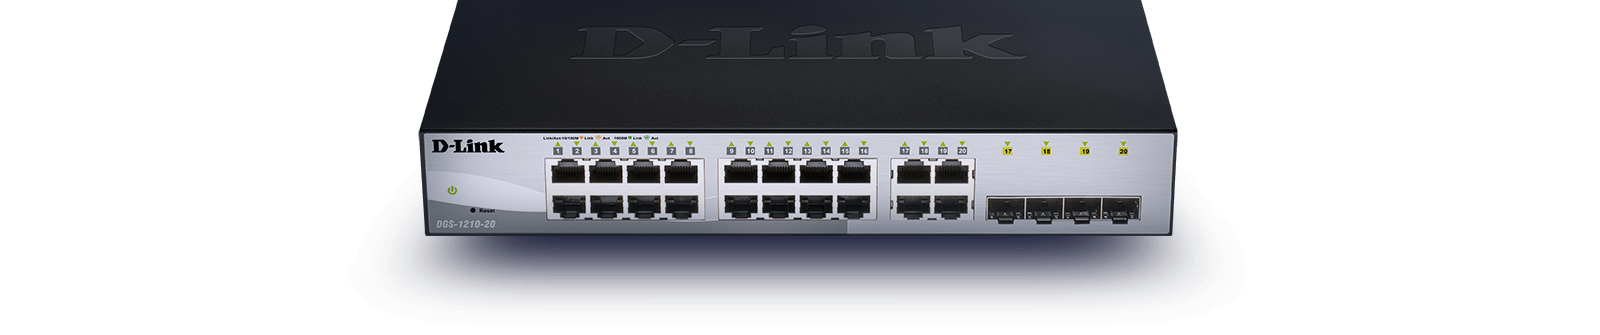 D-Link Assist for DGS-1210 Smart+ Managed Gigabit Switches